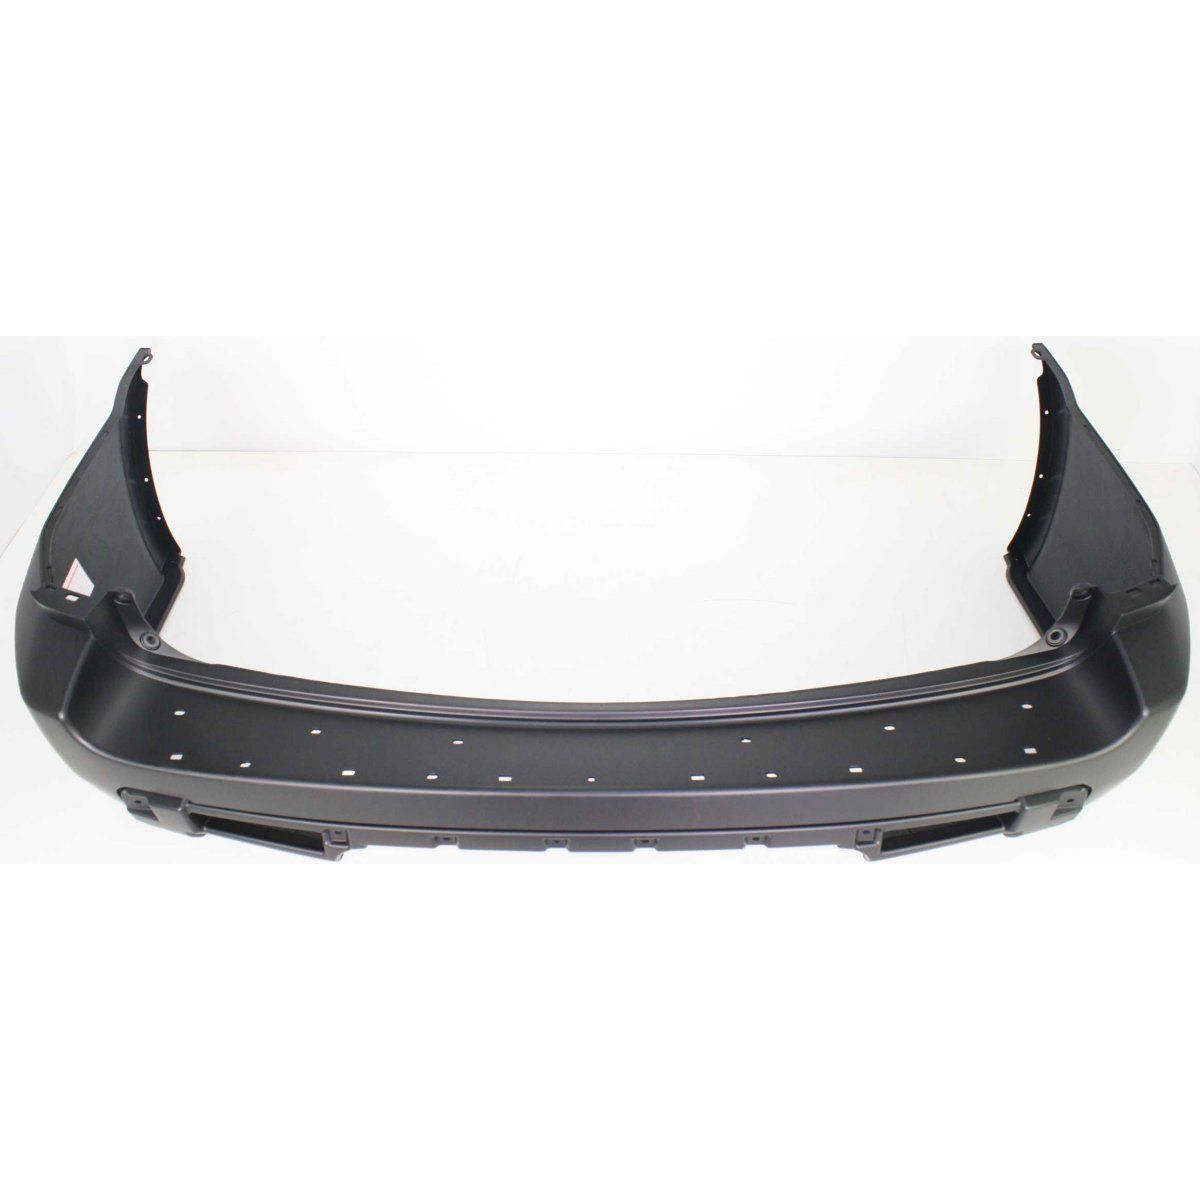 2006-2008 HONDA PILOT Rear Bumper Cover Painted to Match